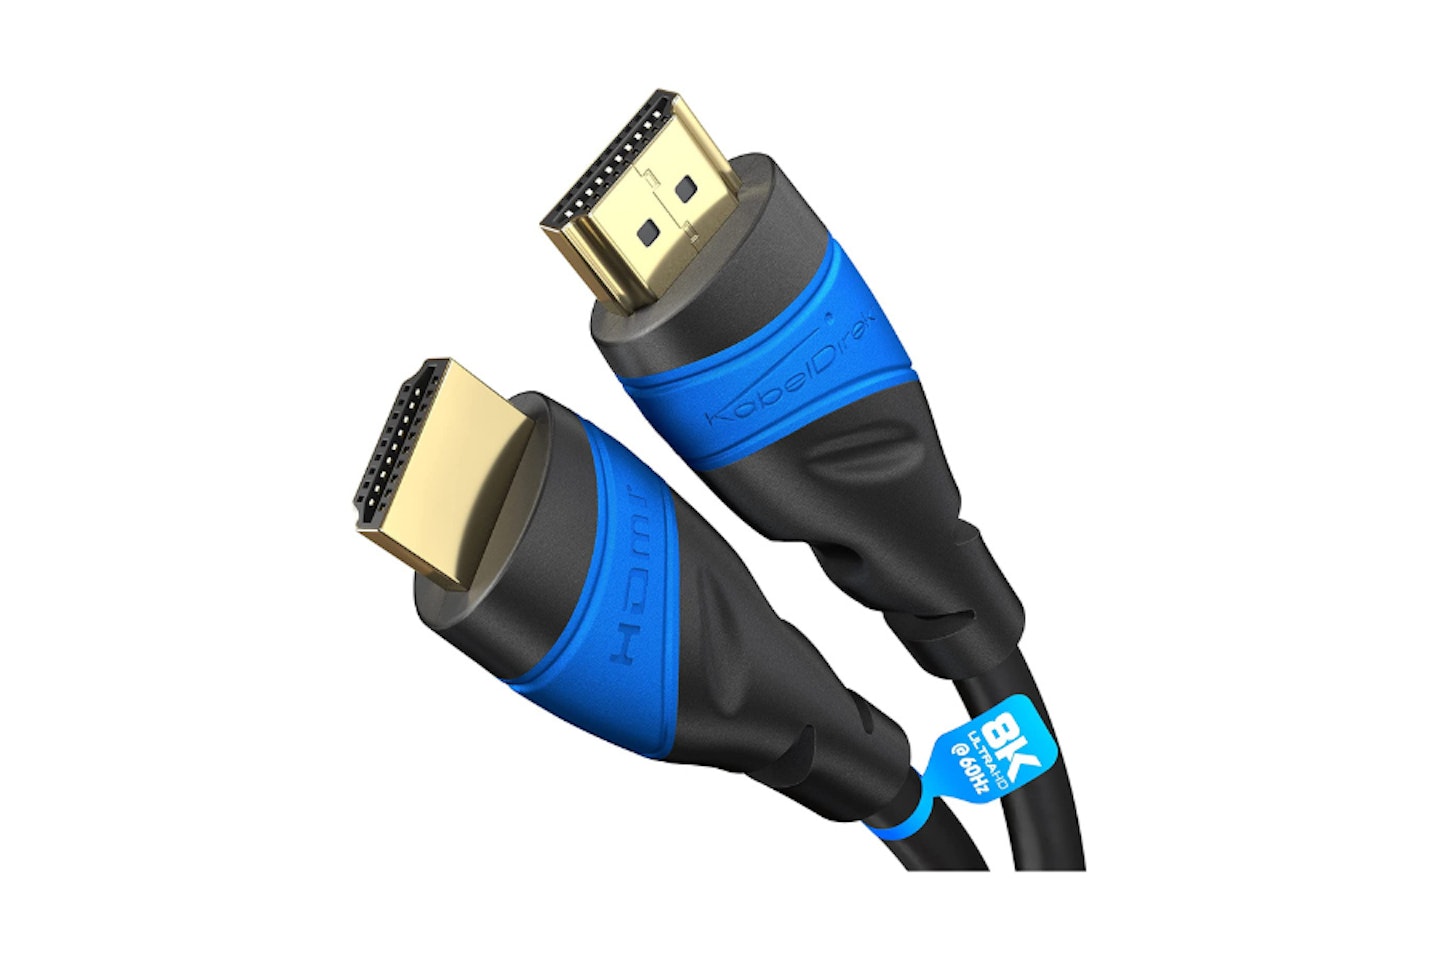 8K / 4K HDMI Cable - 2m - with an A.I.S shielding